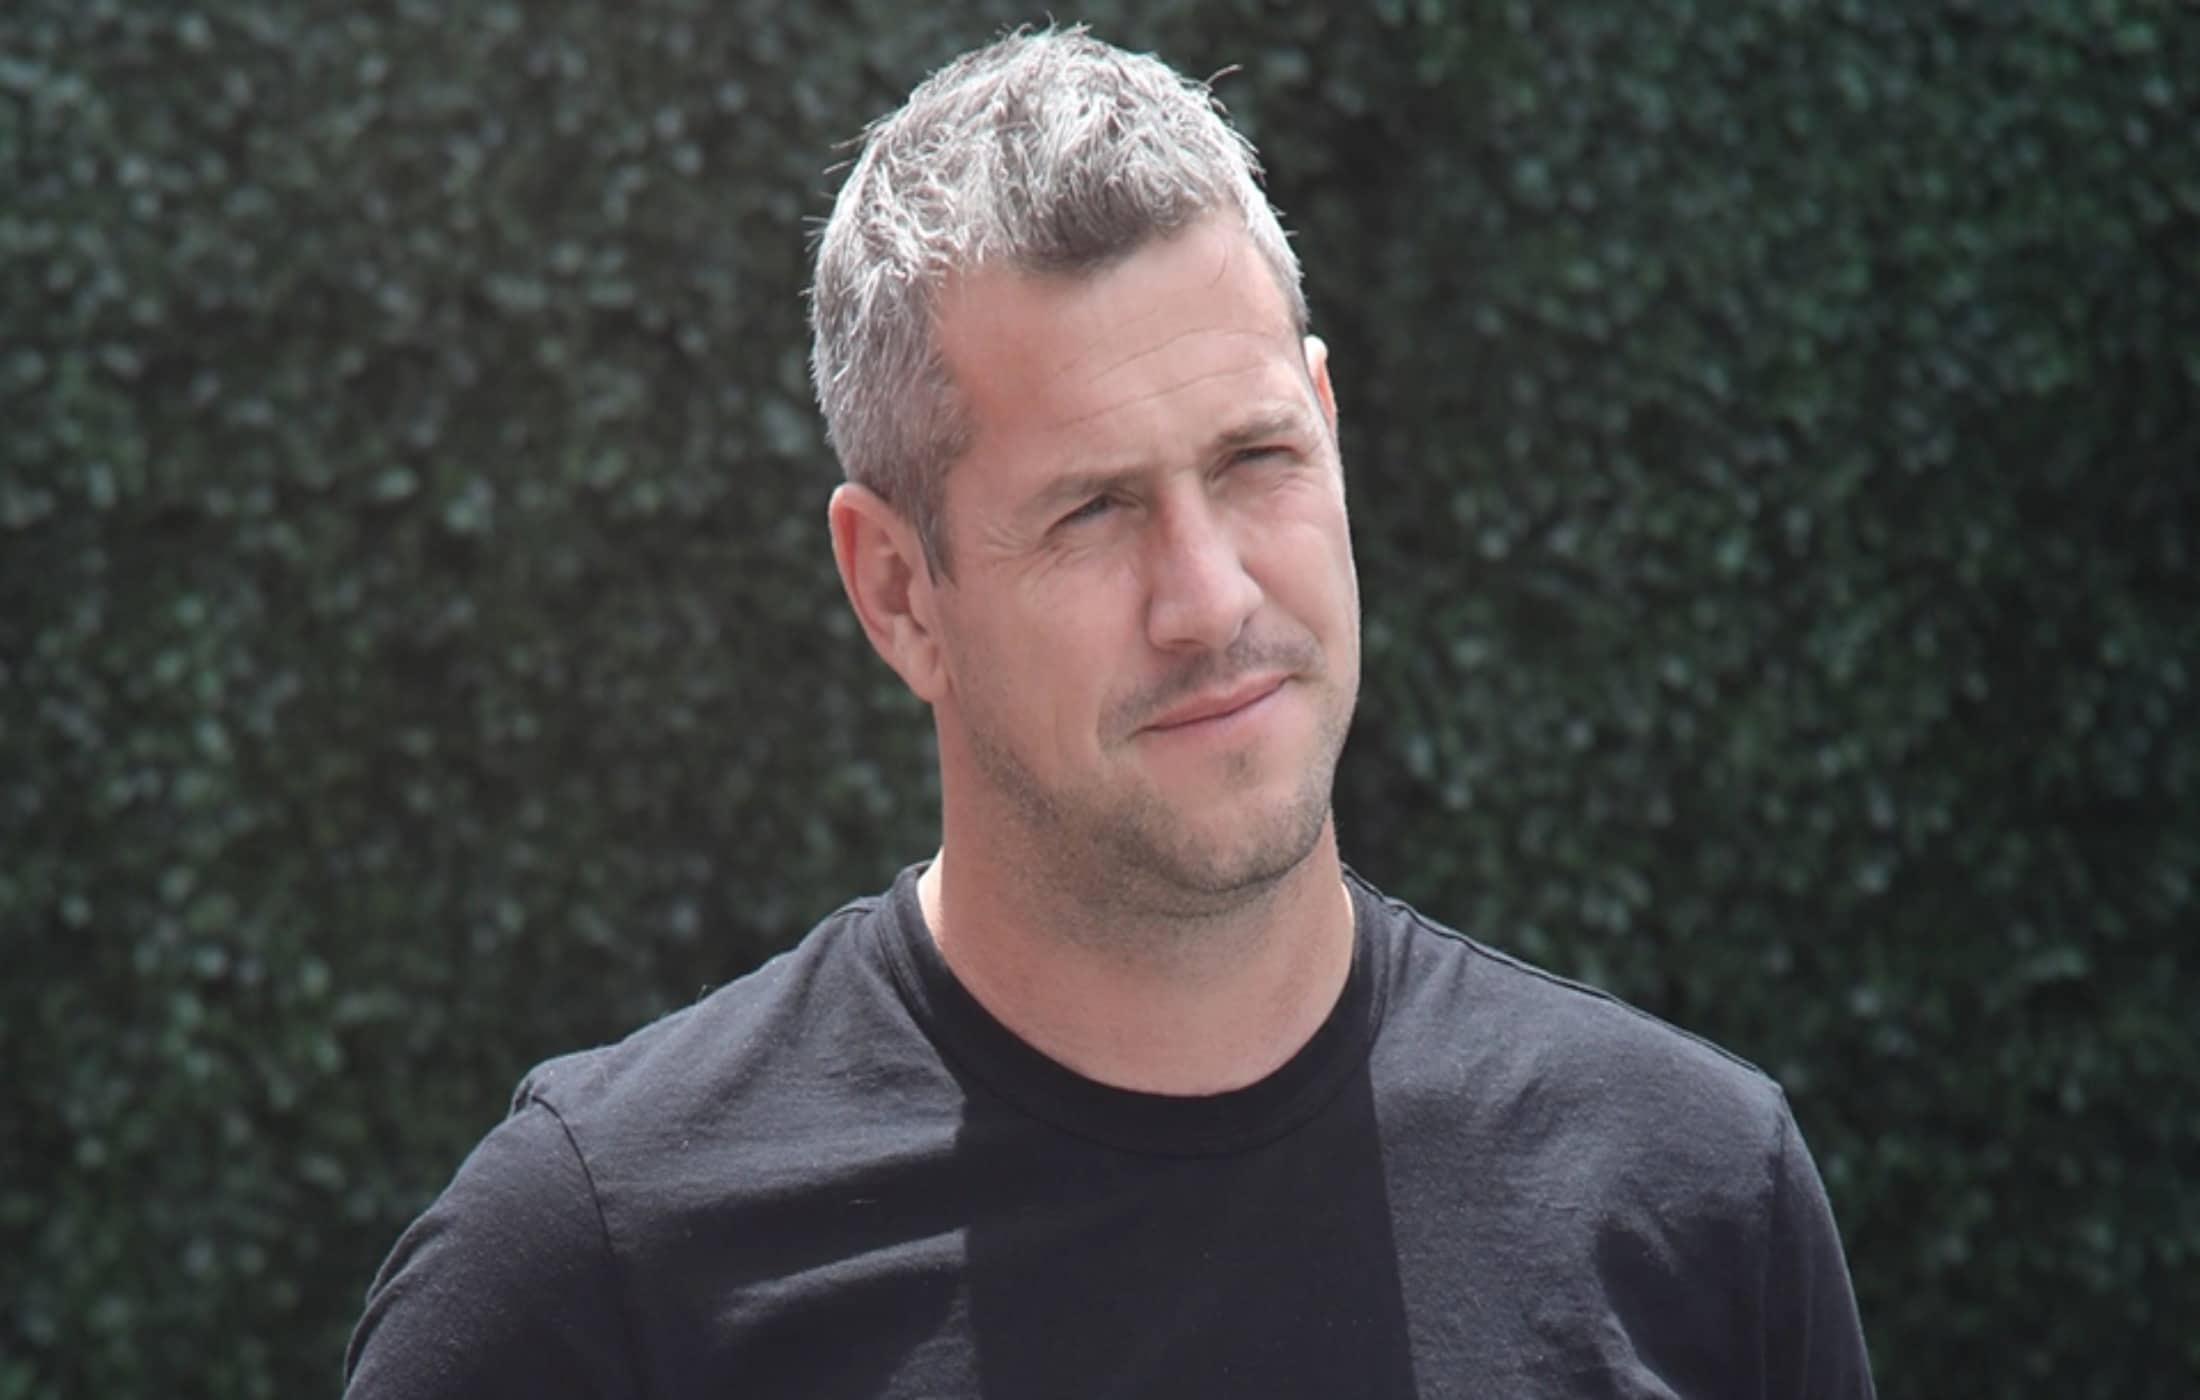 Ant Anstead net worth, age, wiki, family, biography and latest updates